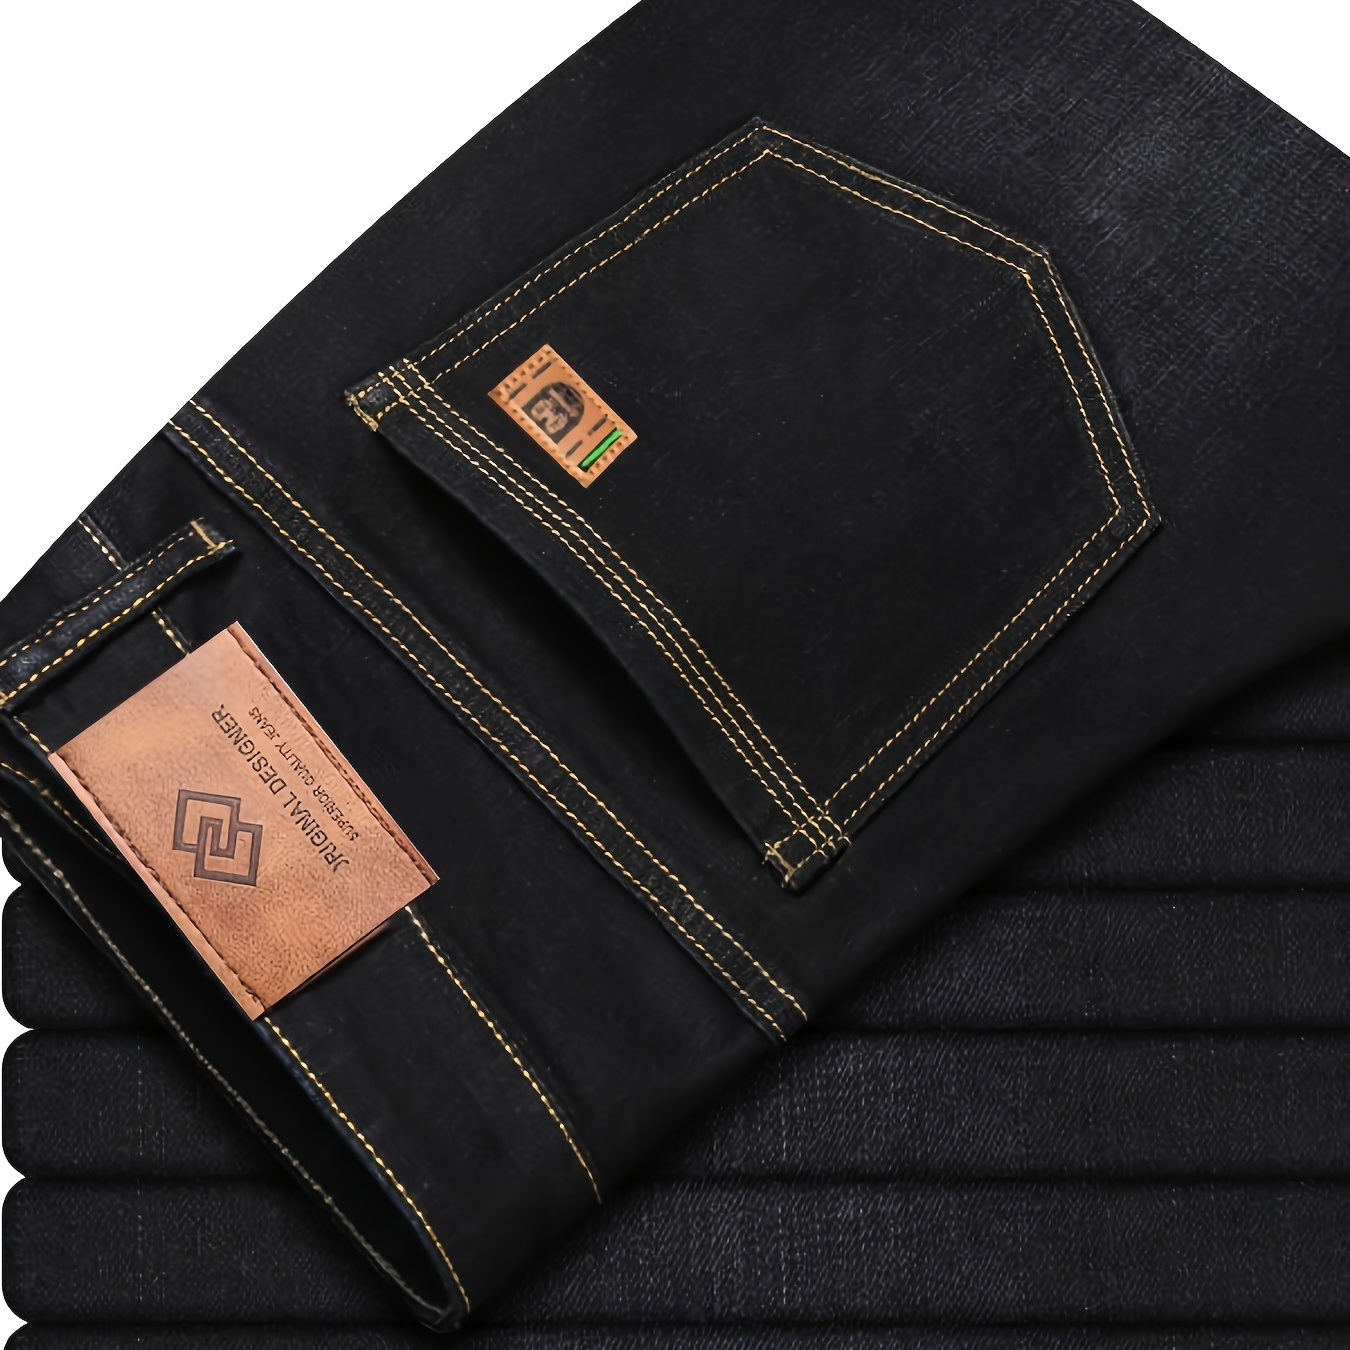 

Classic Design Jeans, Men's Casual Regular Fit Straight Leg Jeans For Daily Wear, All Seasons